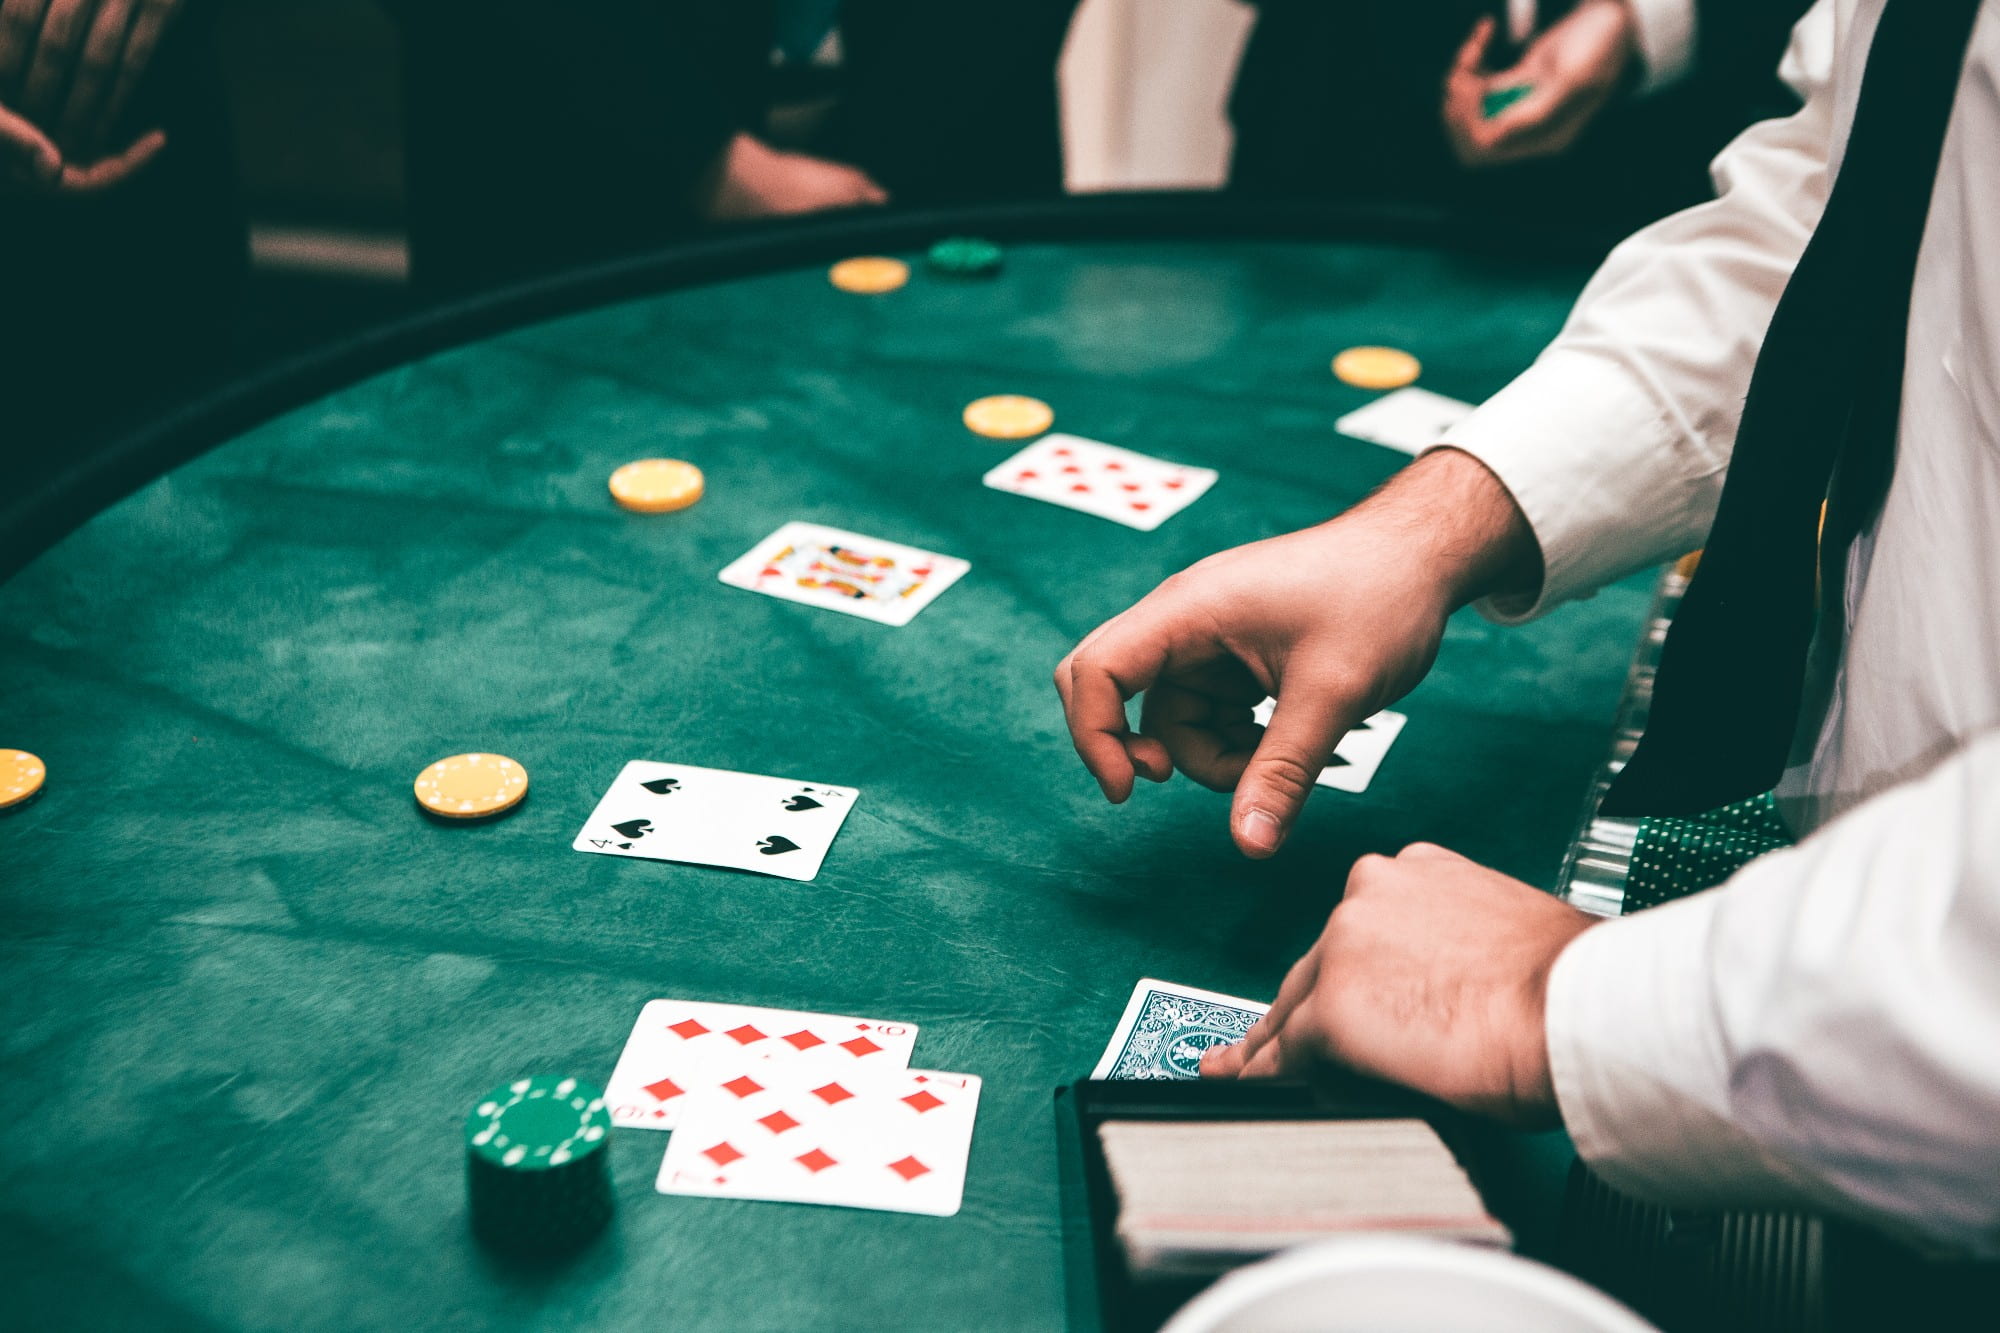 Helping My Spouse With Gambling Addiction | Gateway Foundation